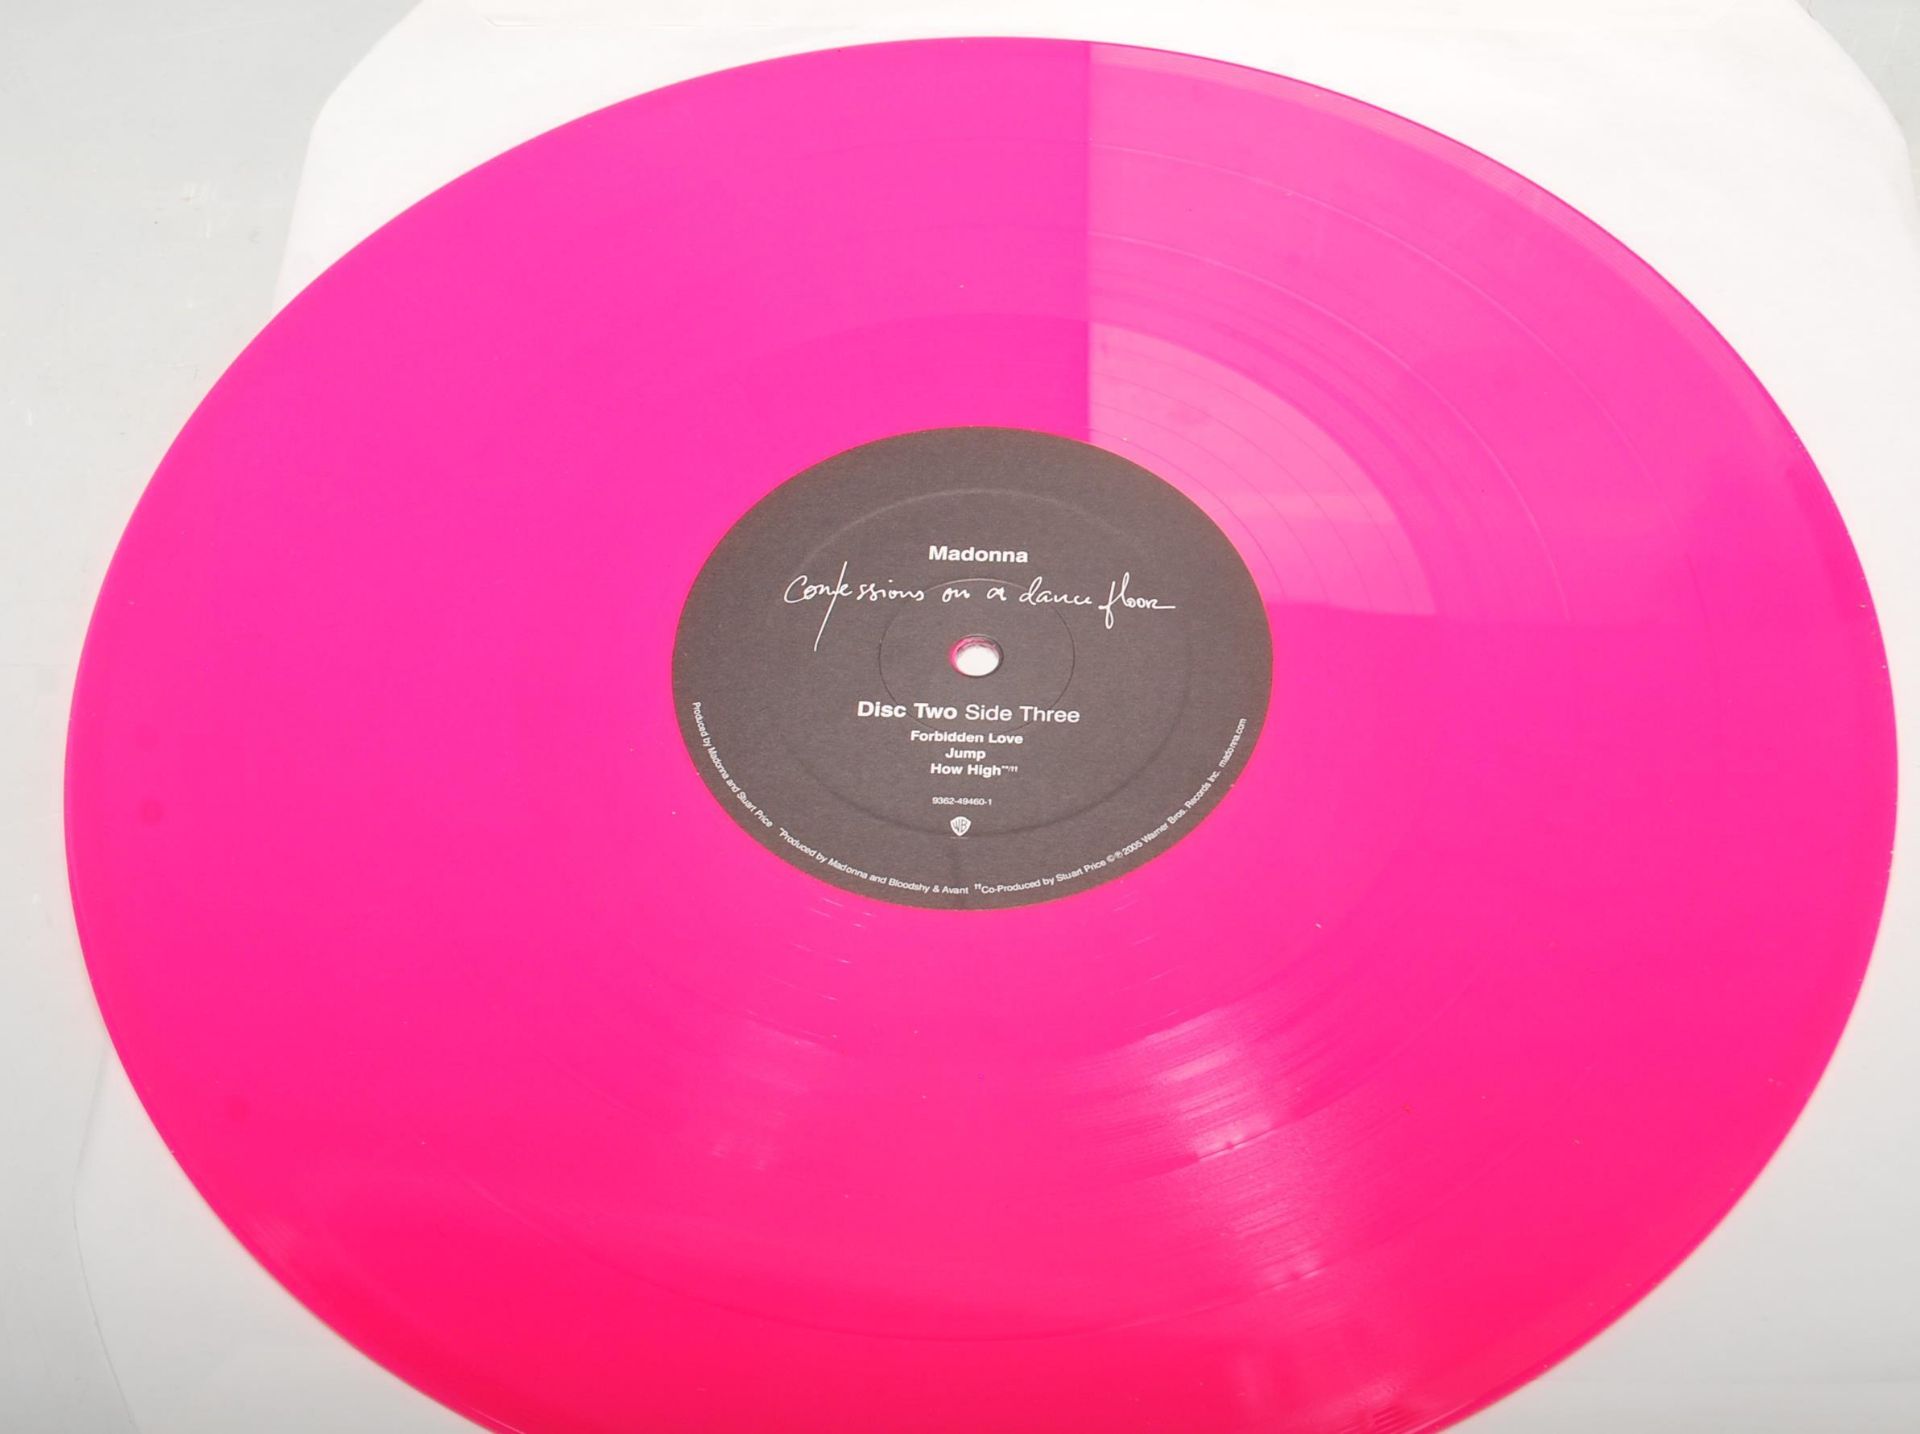 A vinyl long play LP record by Madonna - Confessions on a dance floor. Limited Edition Pink Vinyl. - Bild 2 aus 6